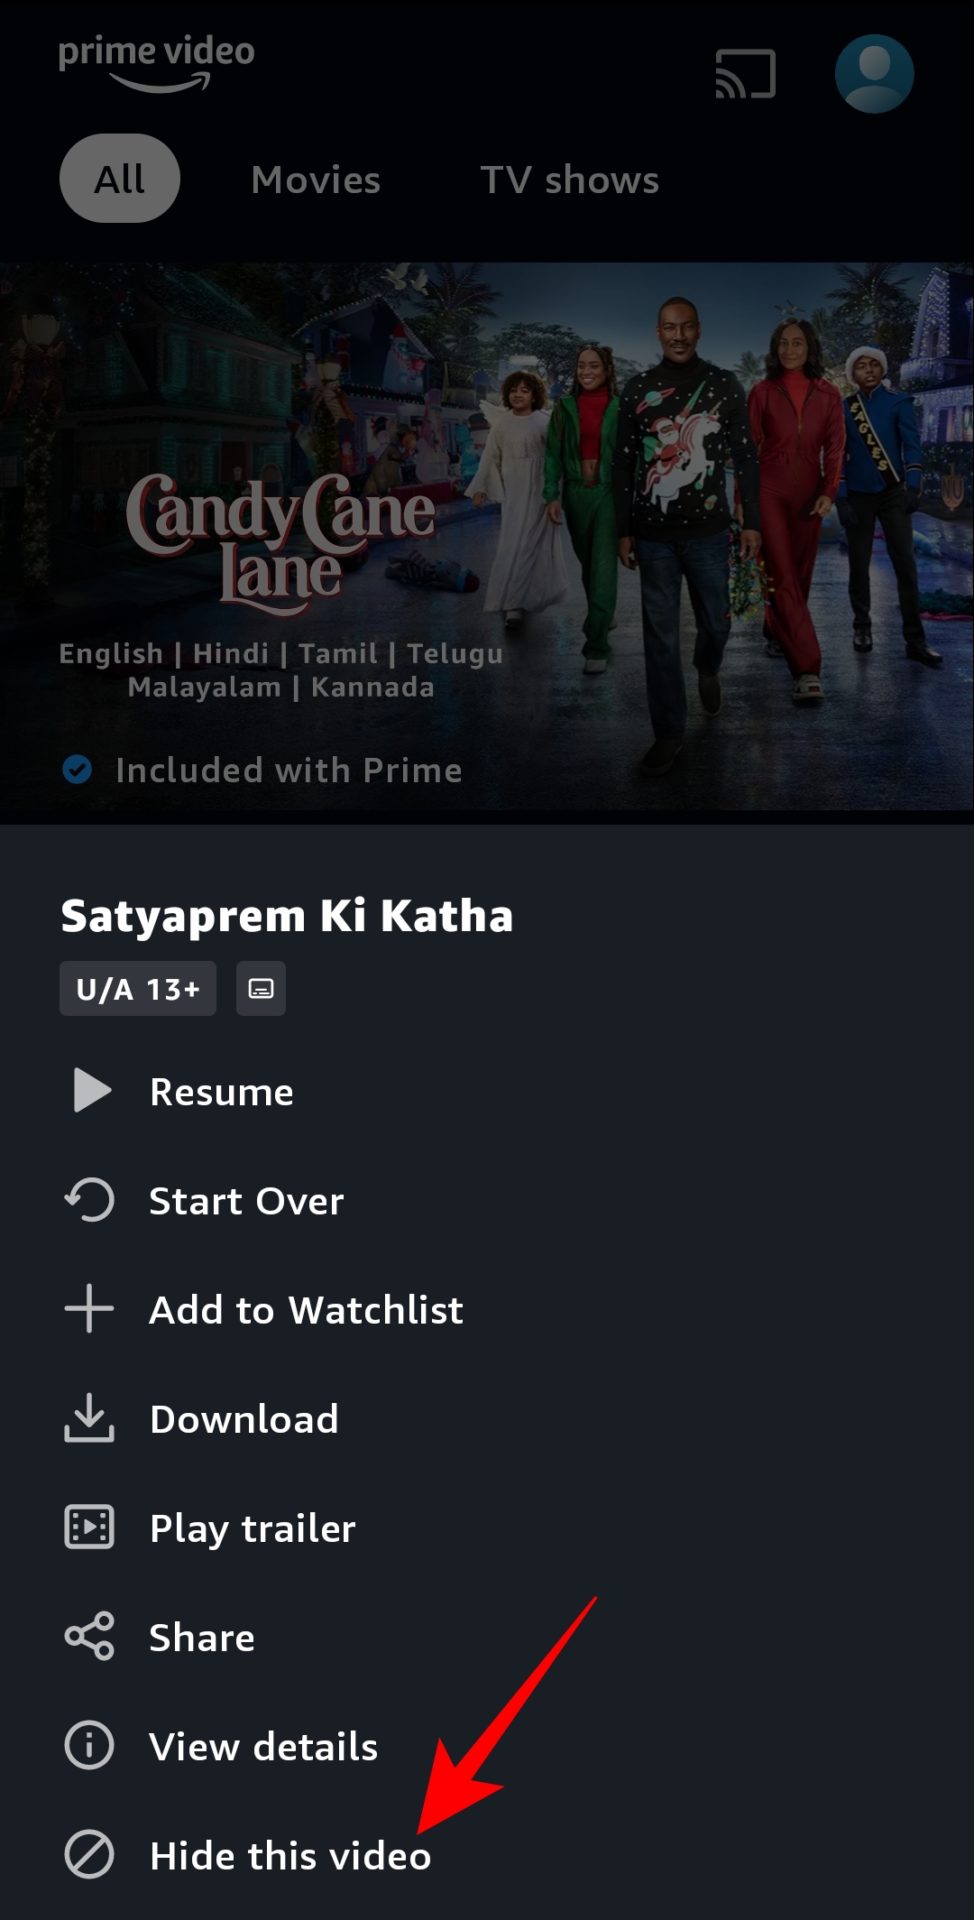 Hide this video option in continue watching section on Android